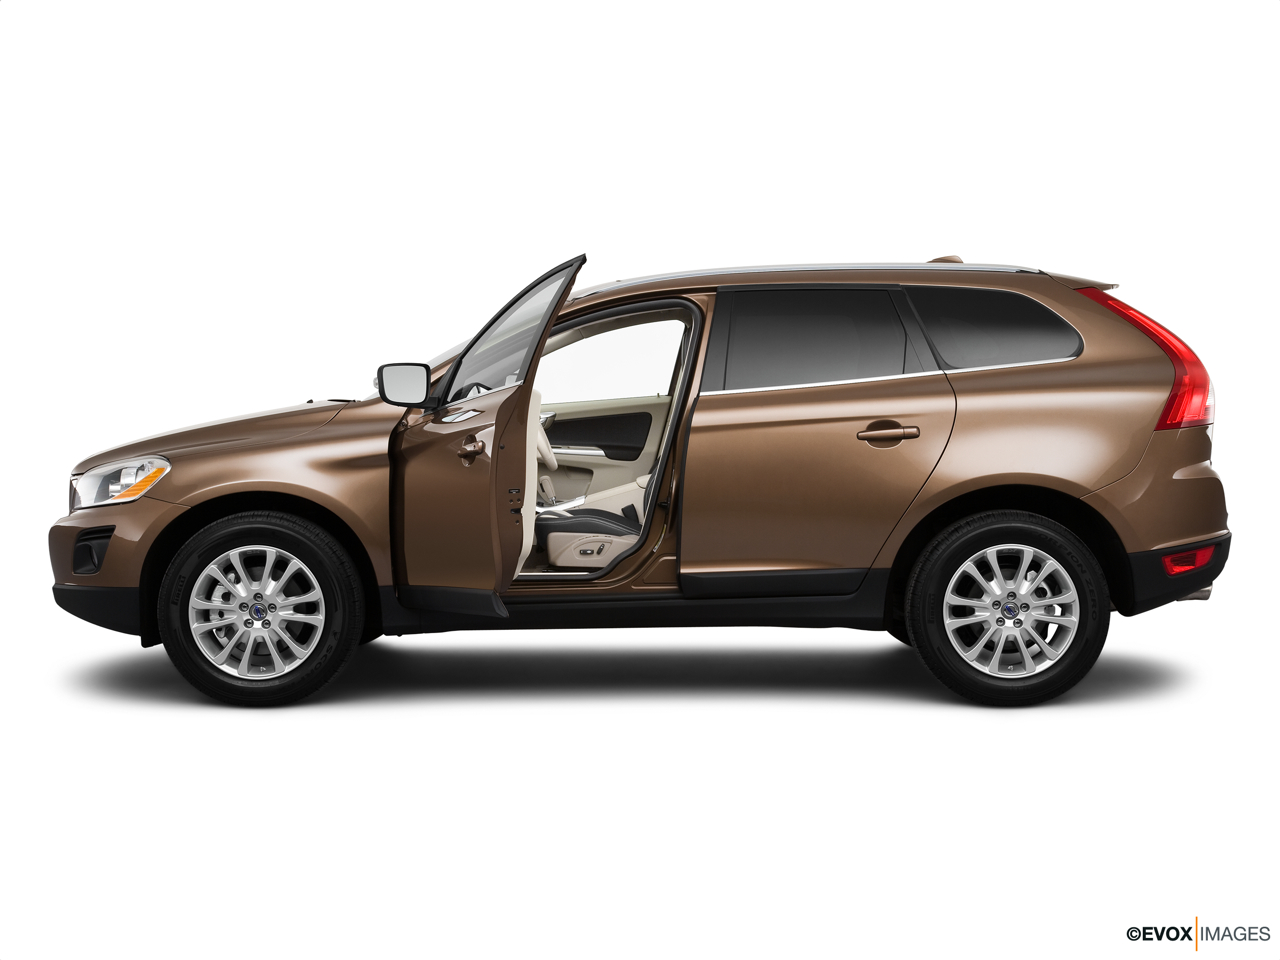 2010 Volvo XC60 T6 AWD Driver's side profile with drivers side door open. 